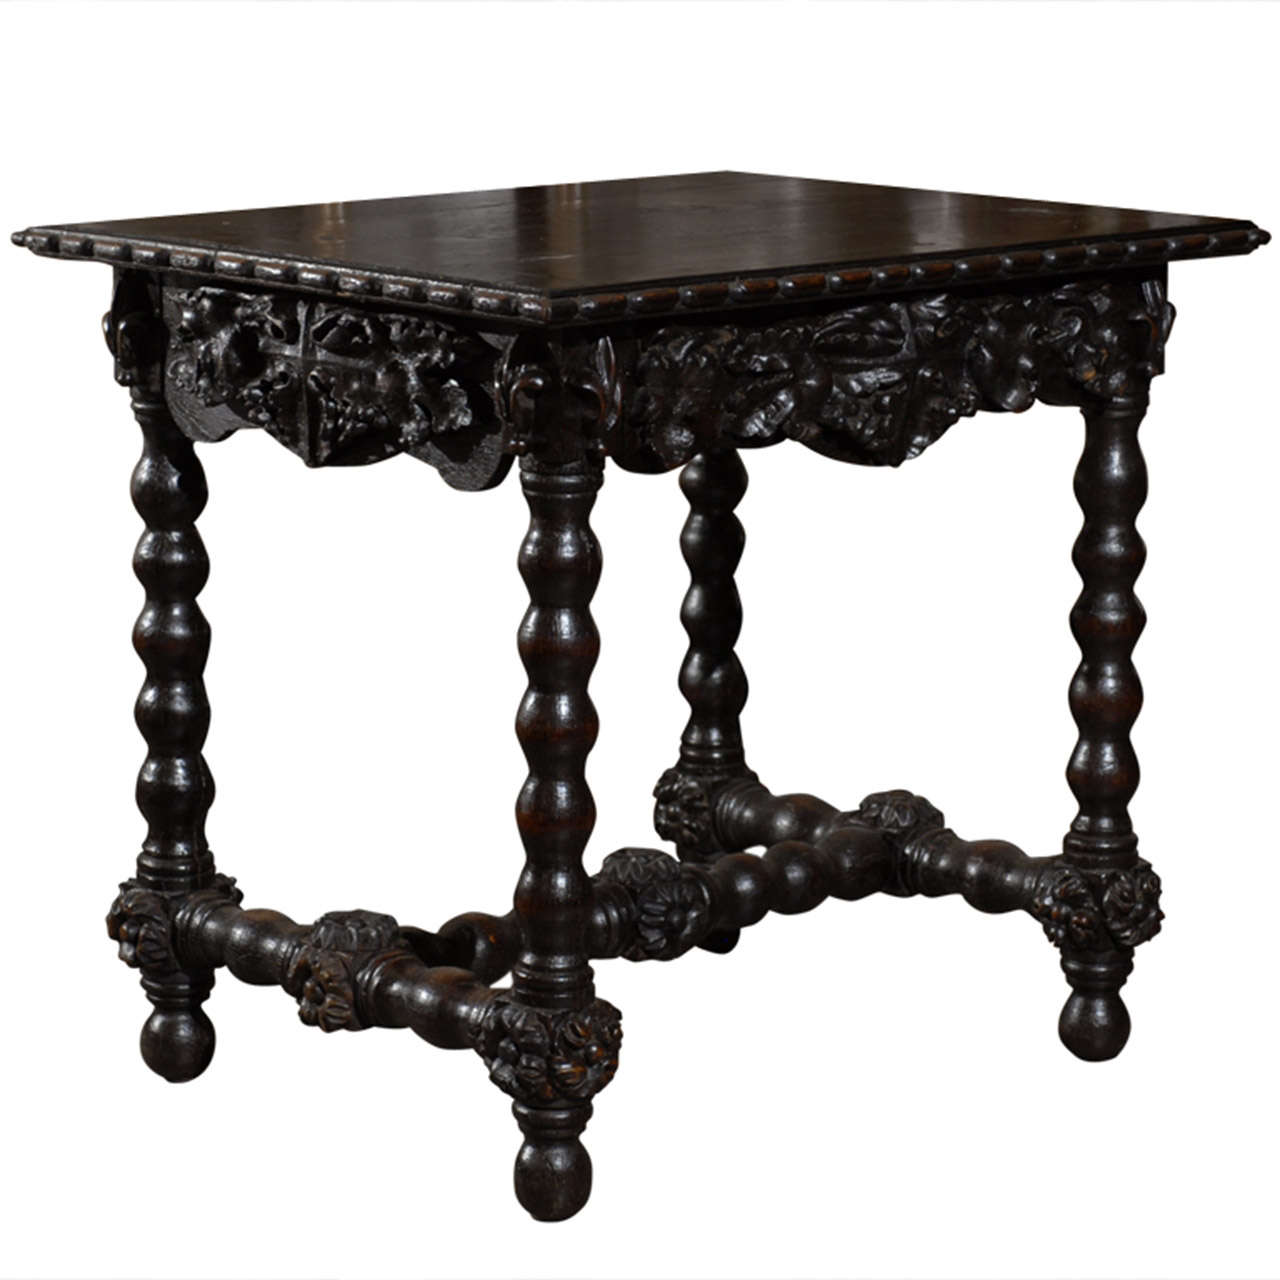 German Black Forest Oak Side Table with Turned Bobbin Legs, Late 19th Century